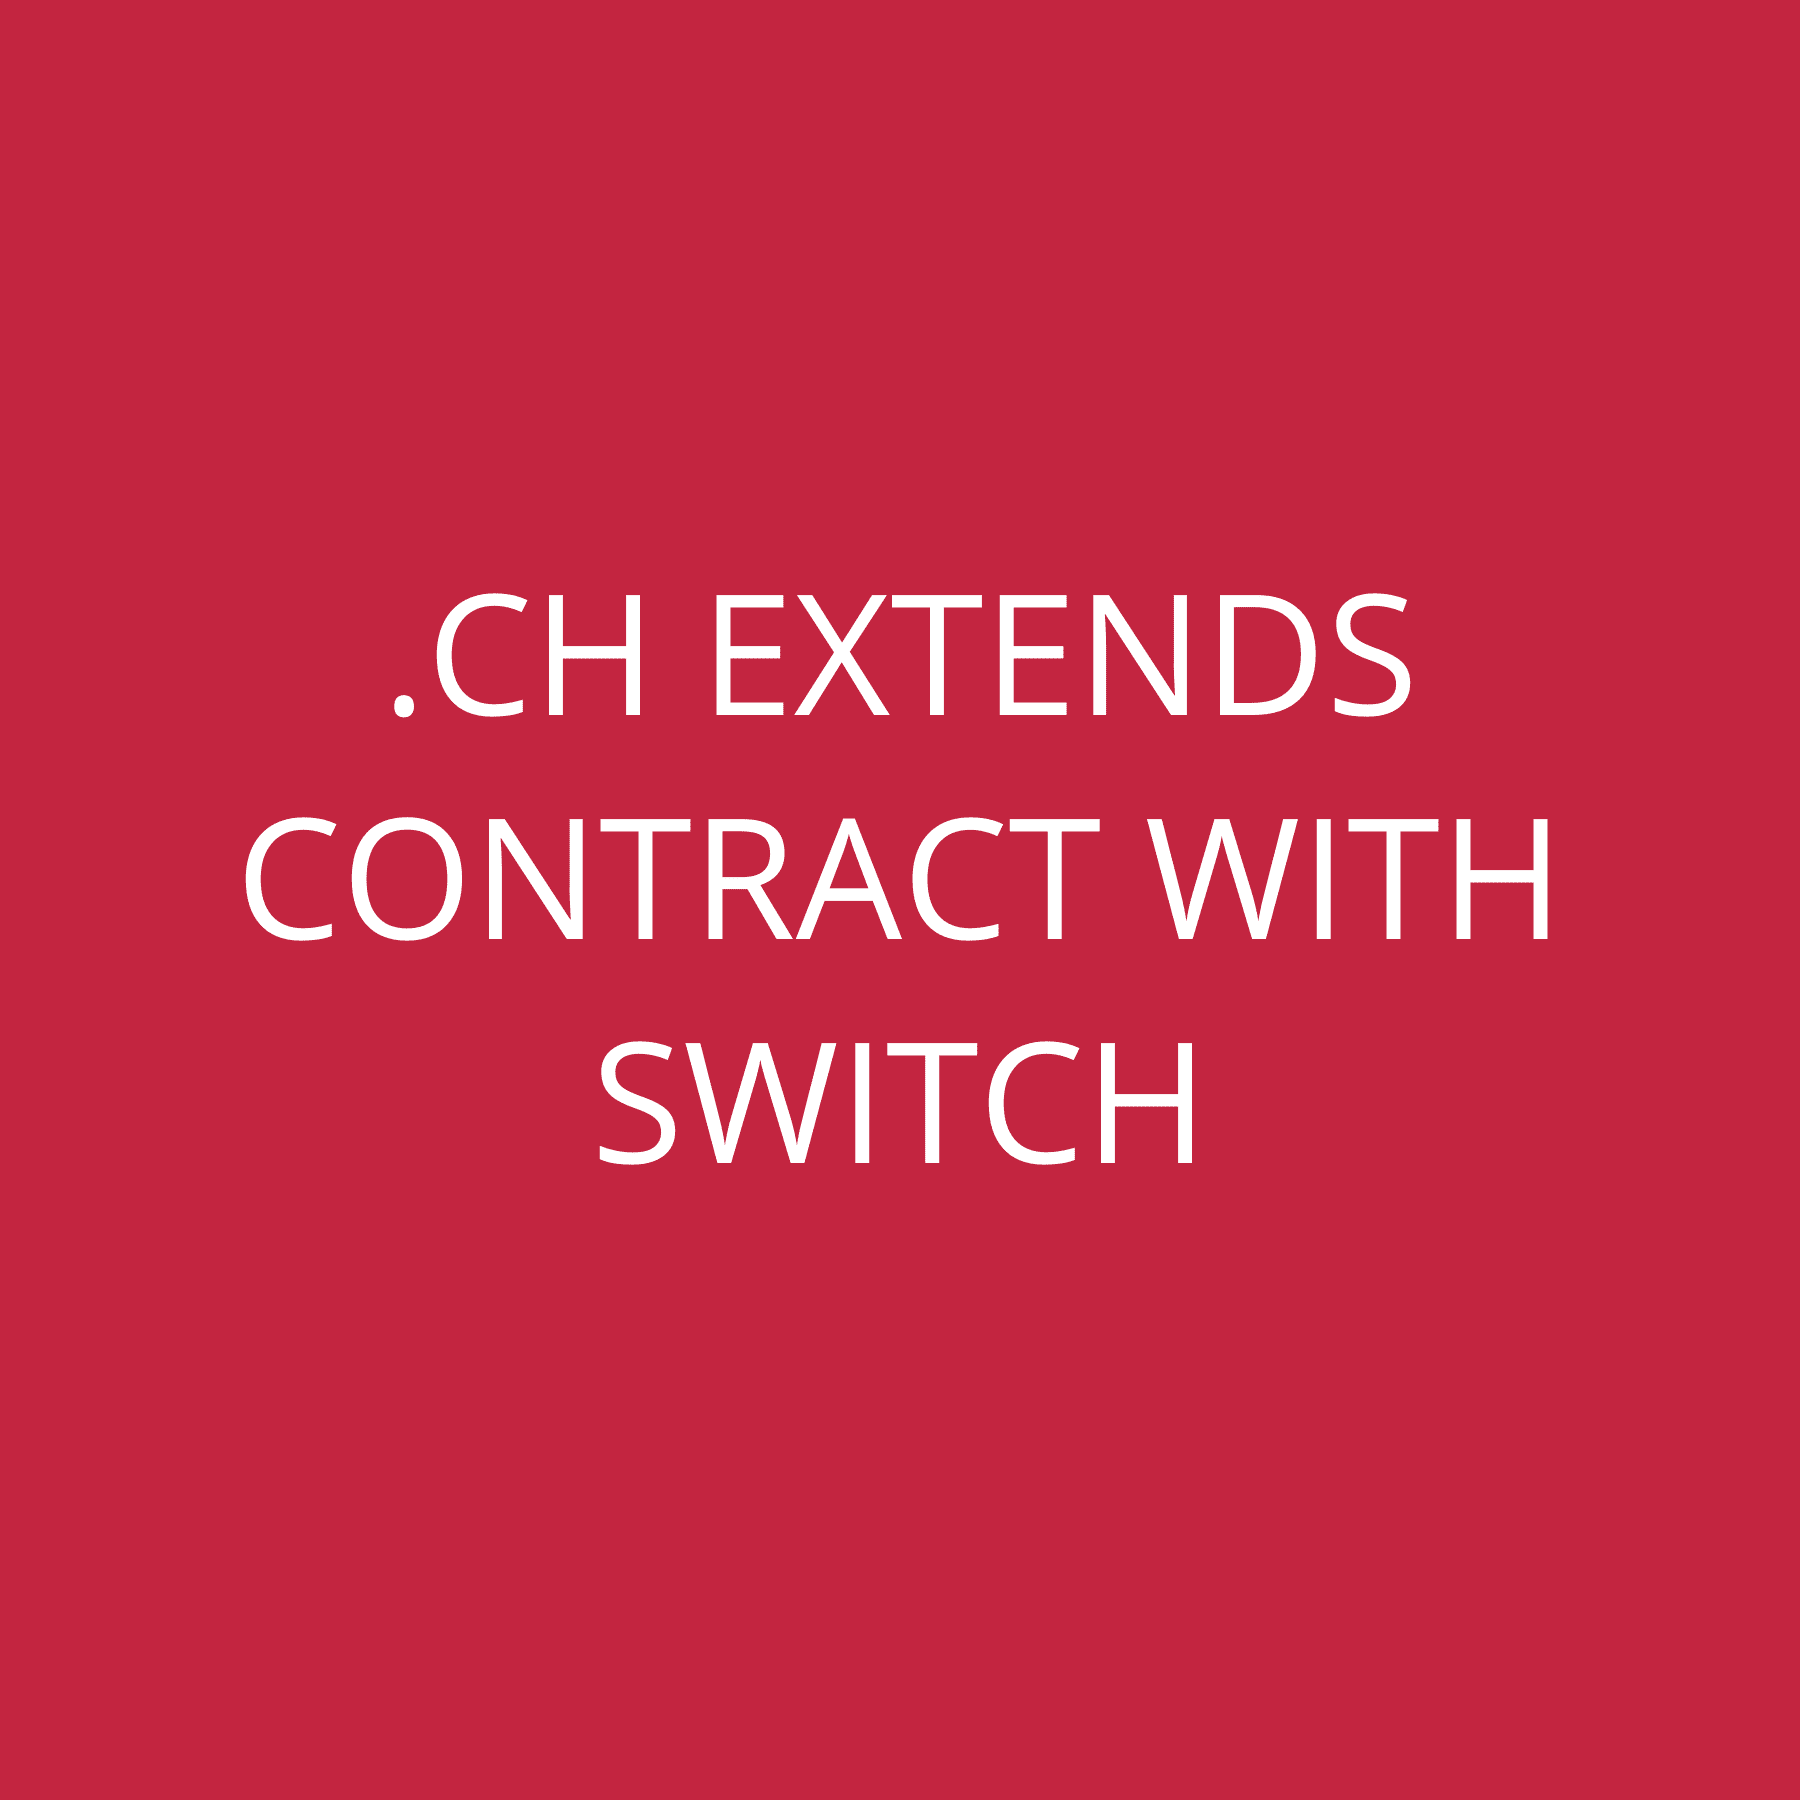 .ch extends contract with SWITCH